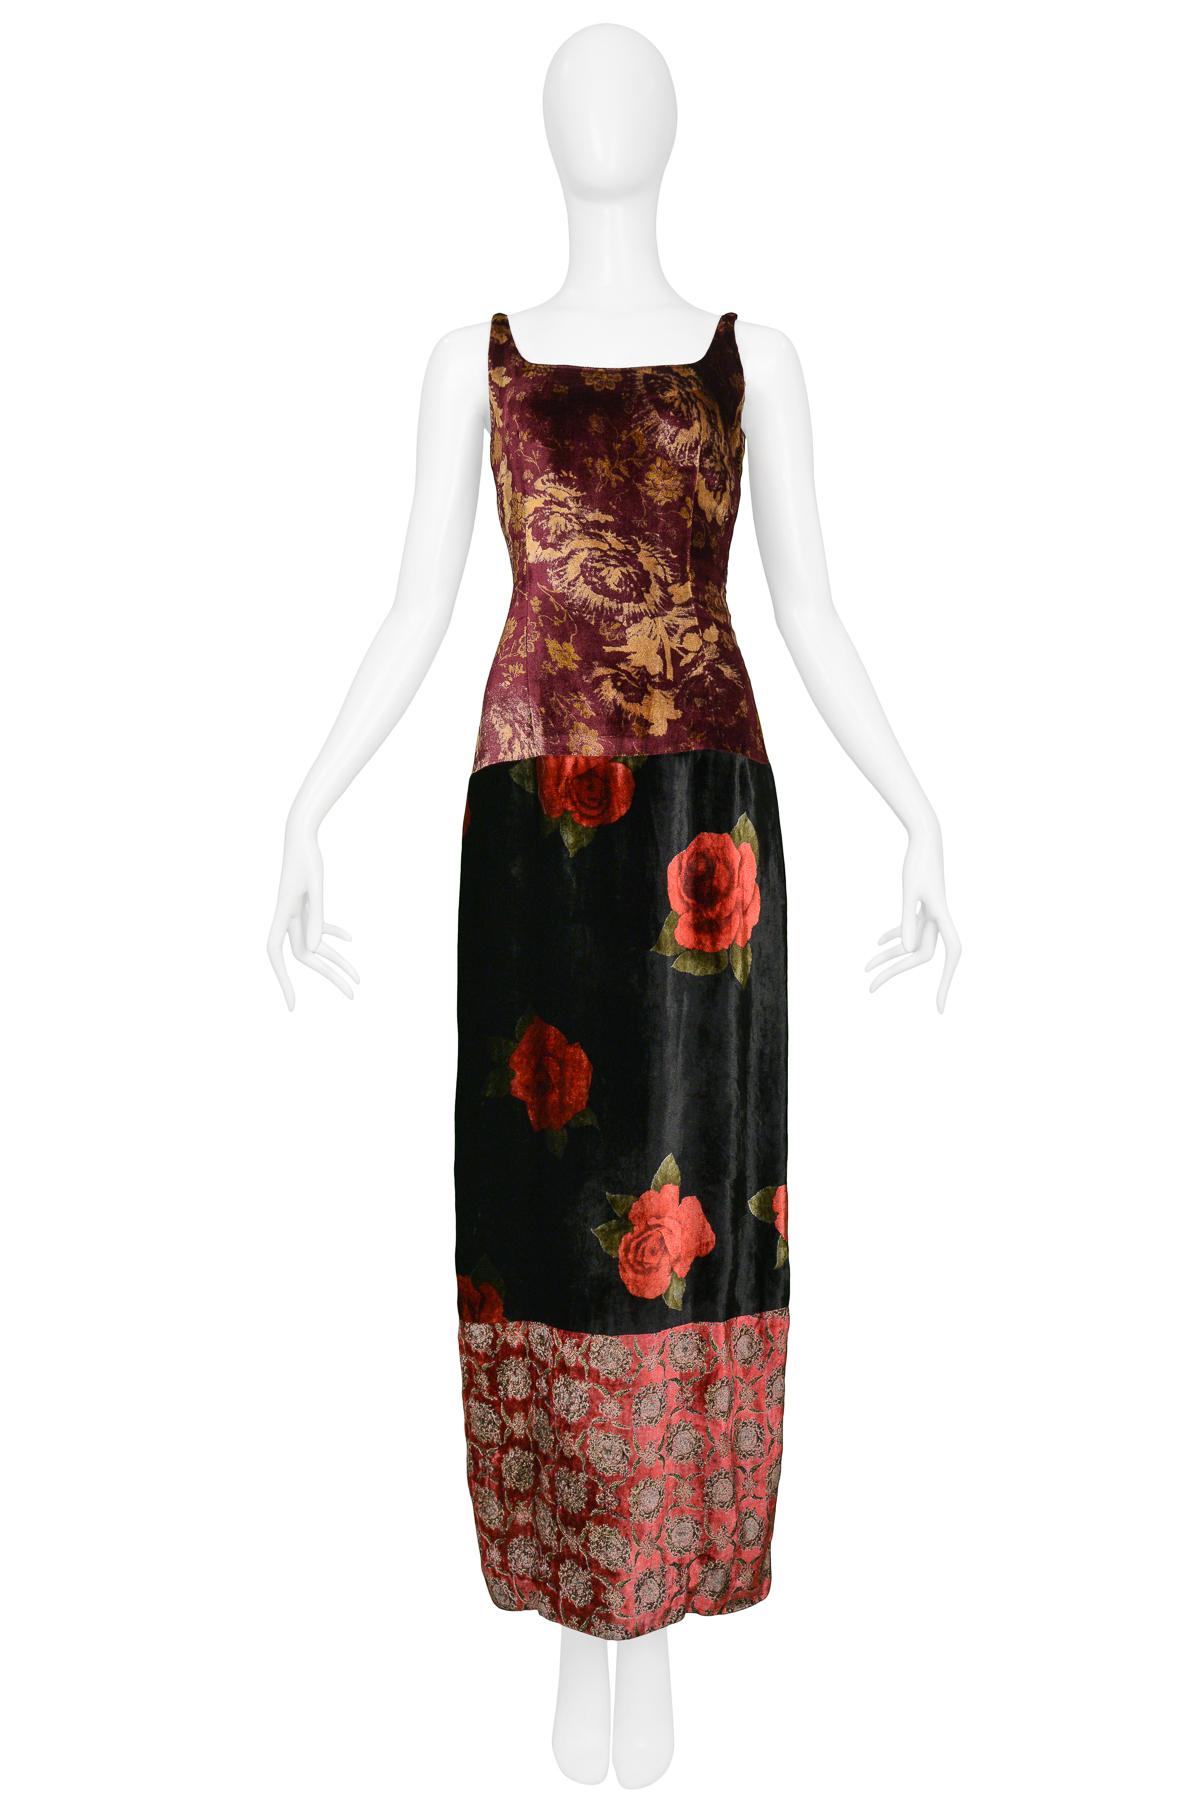 Vintage Dolce & Gabbana burgundy, red, and black floral and baroque printed velvet patchwork gown. Features a jeweled detail at shoulder straps, an open back, and gathers at back skirt.

Excellent Vintage Condition.

Size: 40

Measurements:
Bust